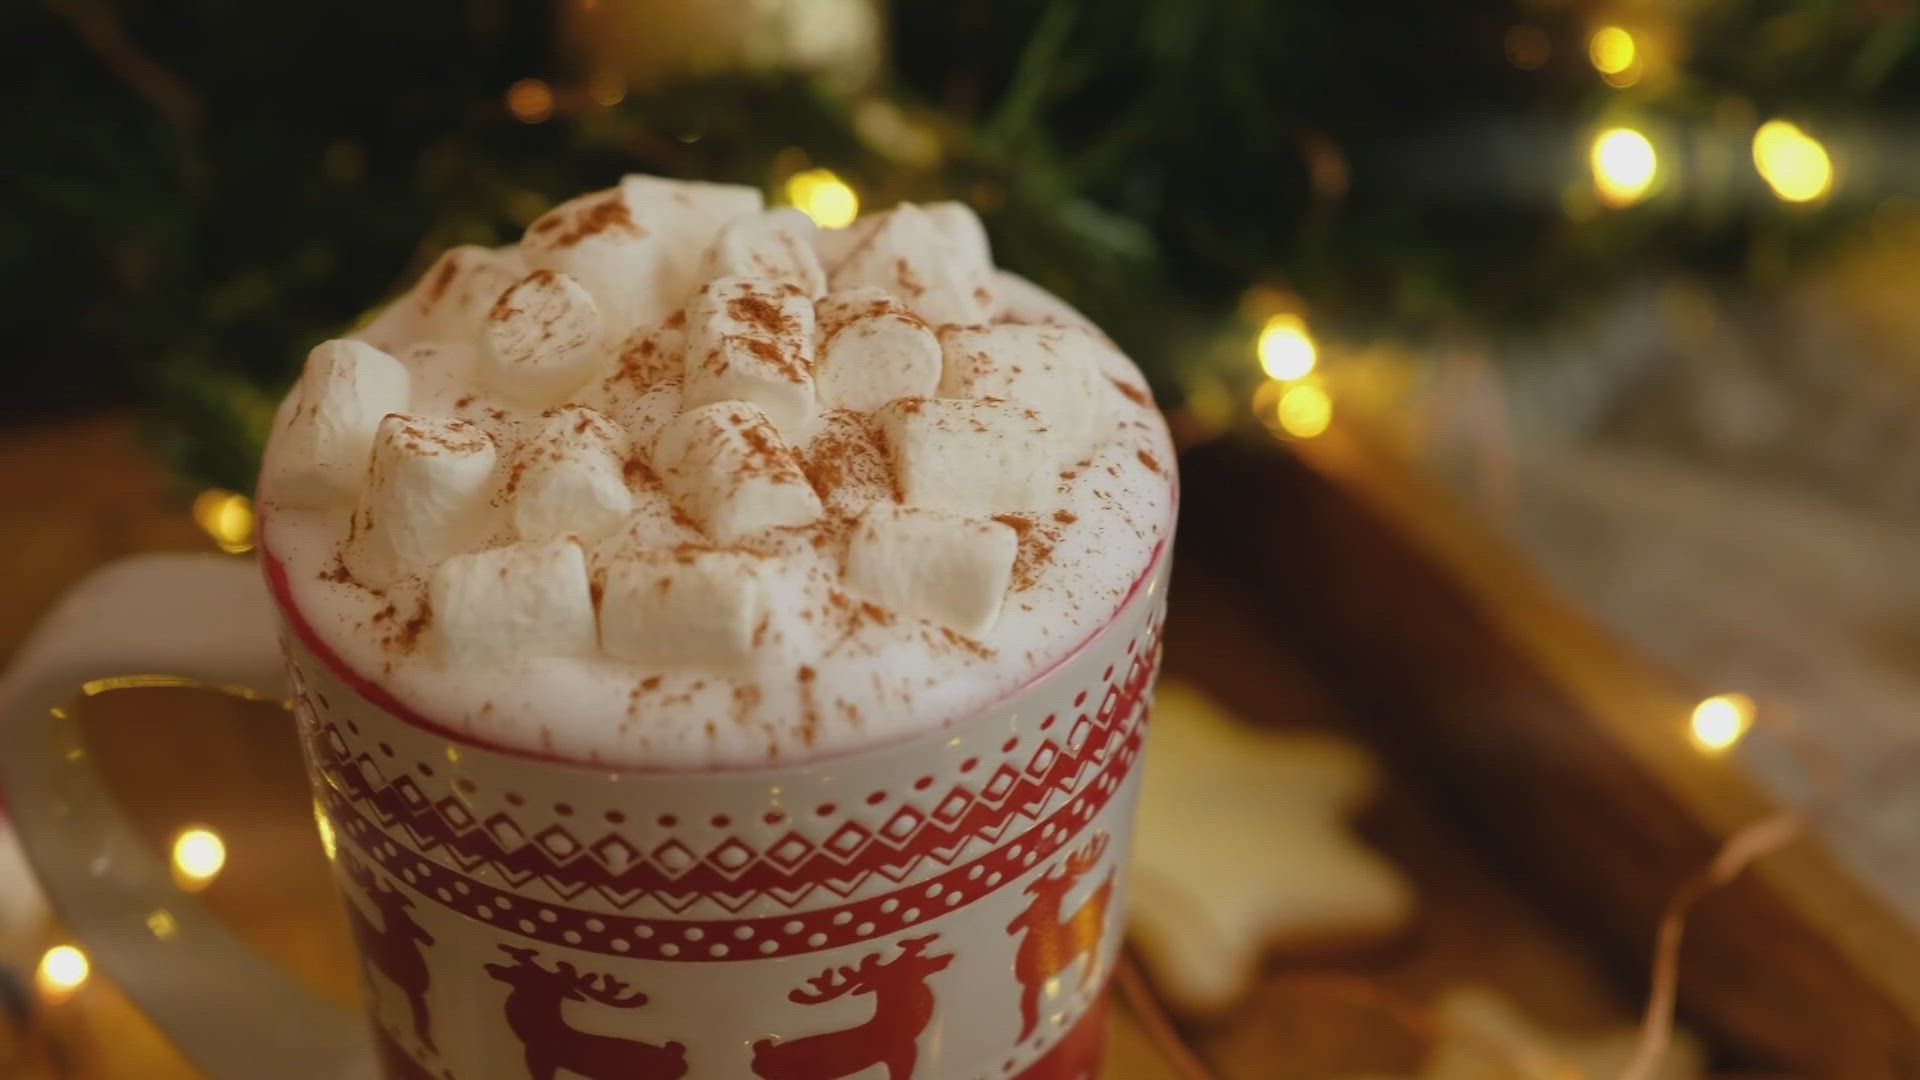 Whether you like it steaming hot or frozen cold, there's some hot cocoa out there for you.